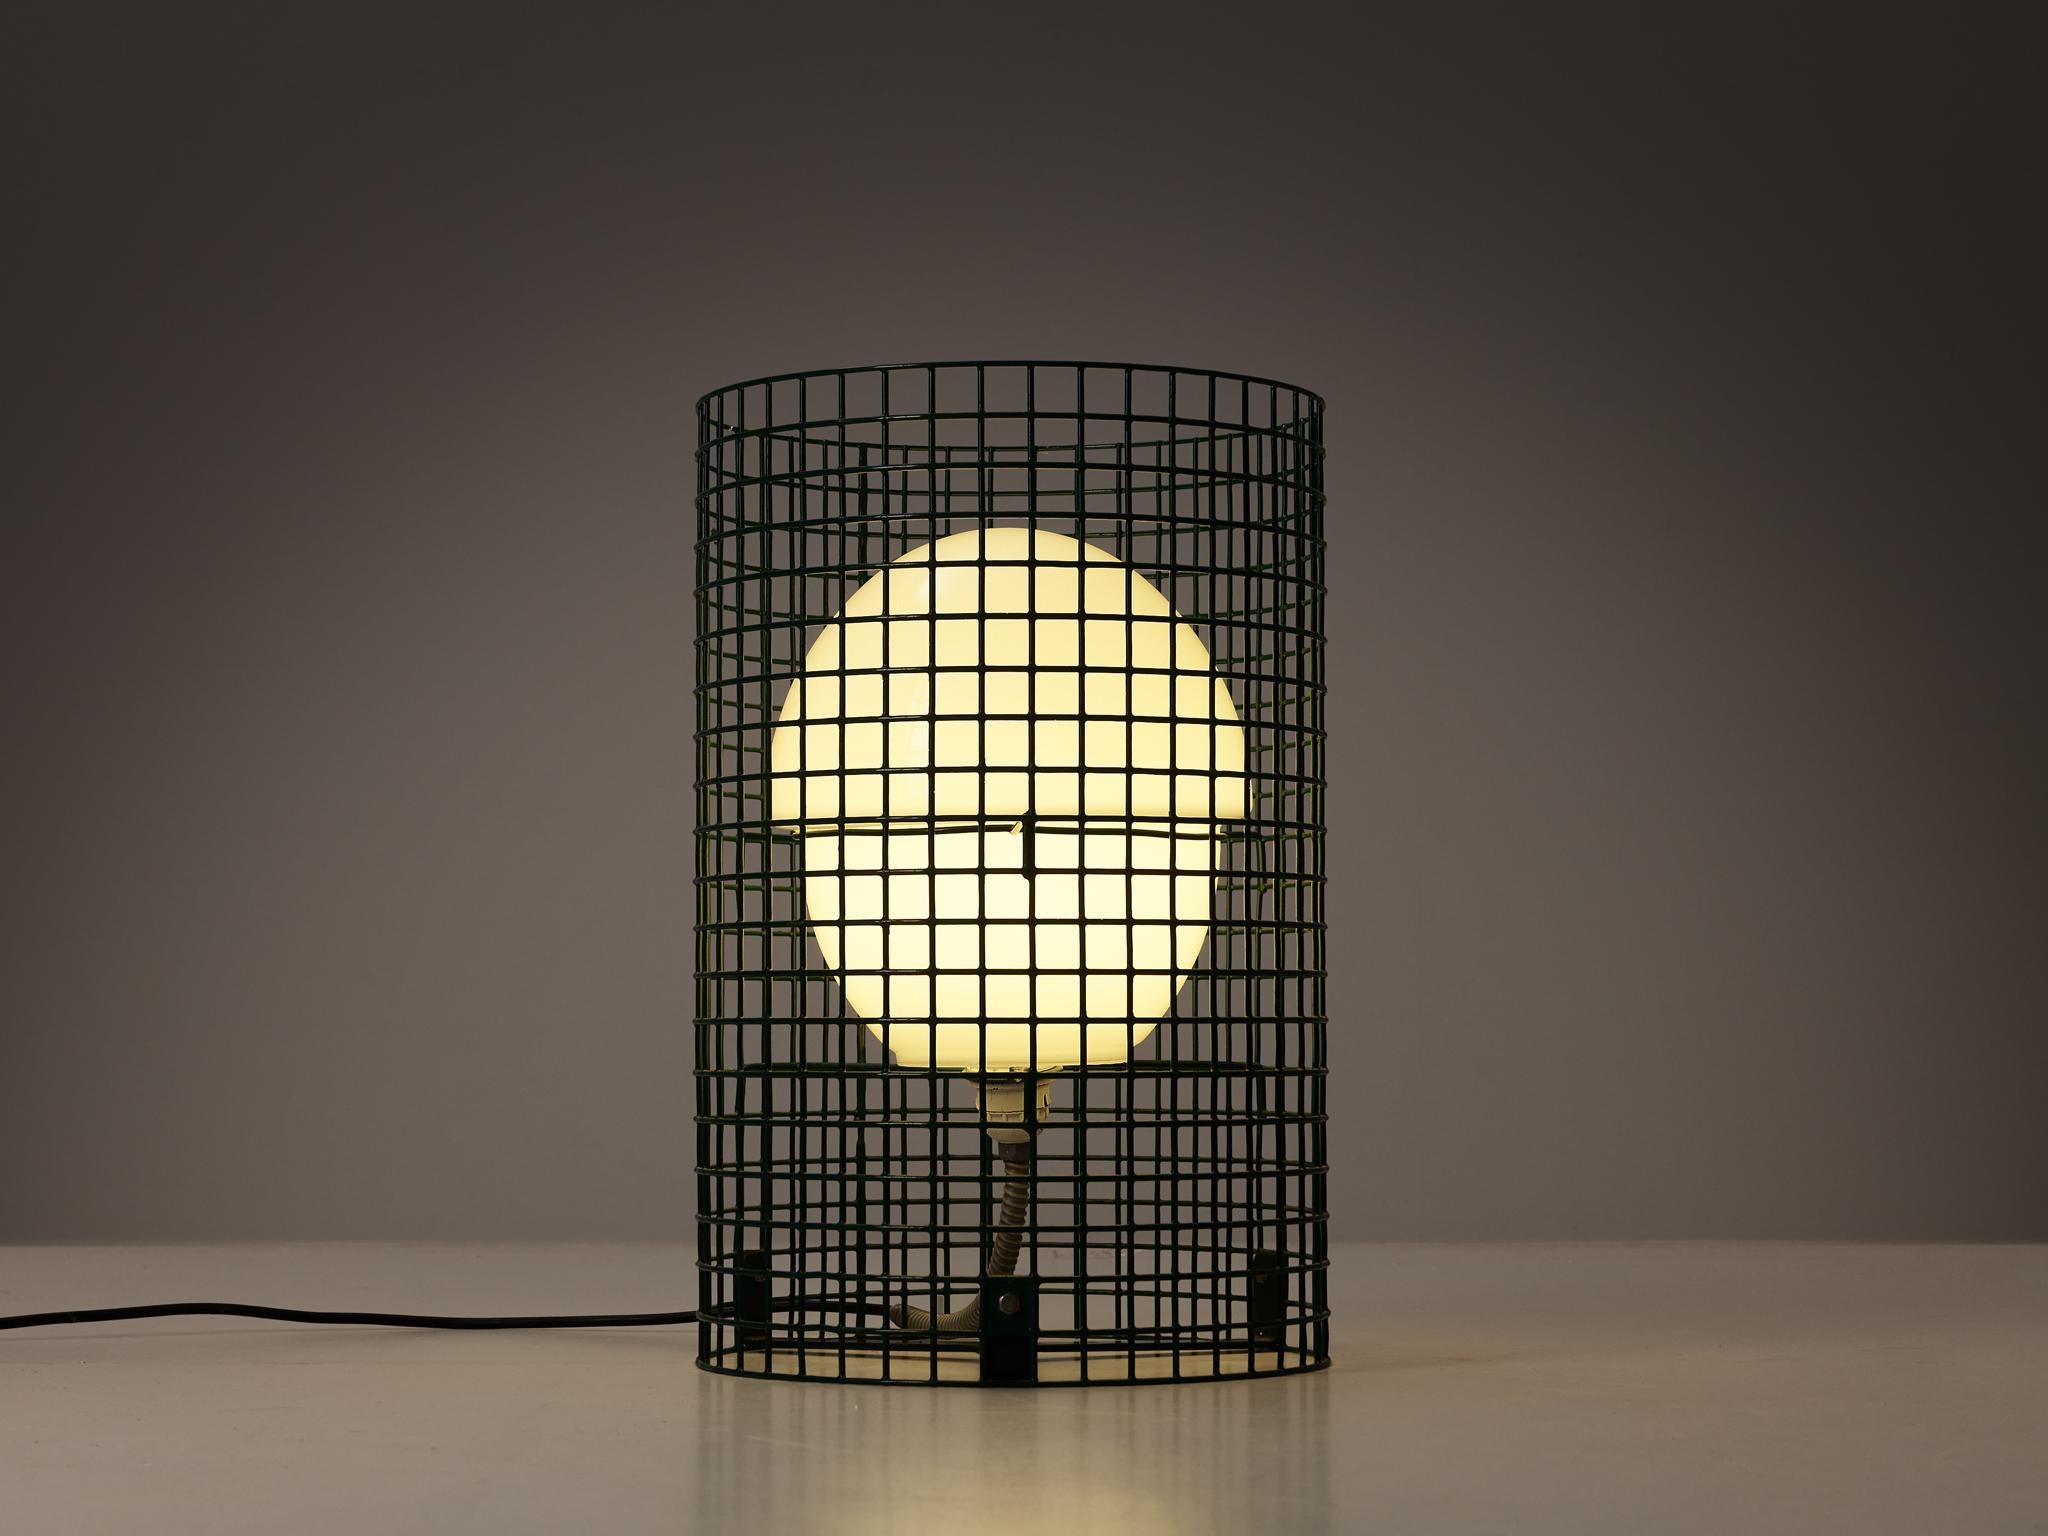 Gino Sarfatti for Arteluce, floor lamp model 1102/D  'garden light', lacquered metal, glass, Italy, 1975 

The frame of this eccentric light sculpture is executed in a green colored metal mesh, a material that has frequently been used for garden